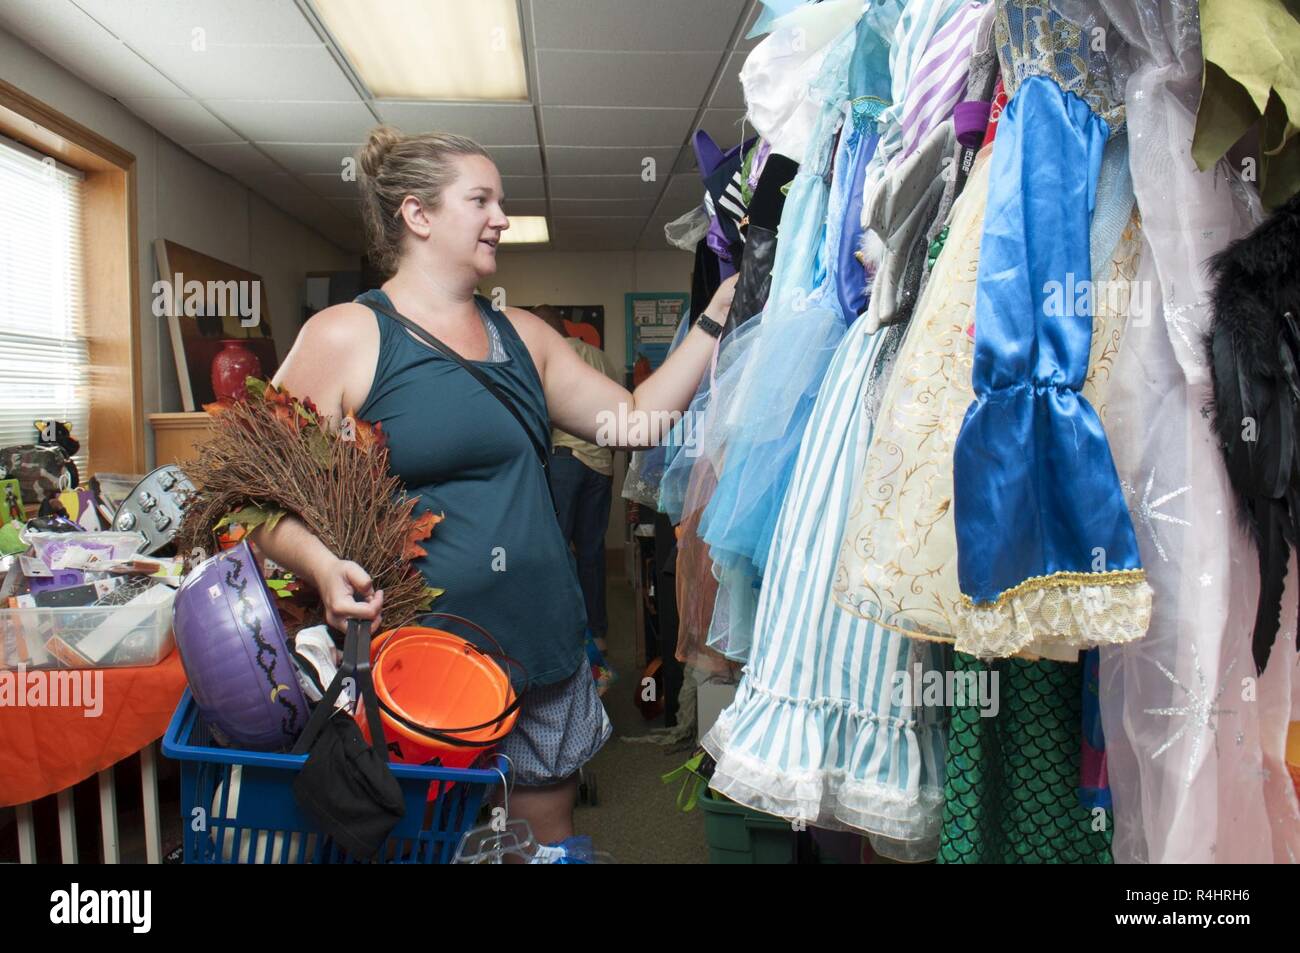 JOINT BASE PEARL HARBOR-HICKAM — Erin Sanders browses items at the Hickam Thrift Shop aboard Joint Base Pearl Harbor-Hickam, Sept. 26, 2018. The Hickam Officers' Spouses' Club operates the Hickam Thrift Shop. Stock Photo